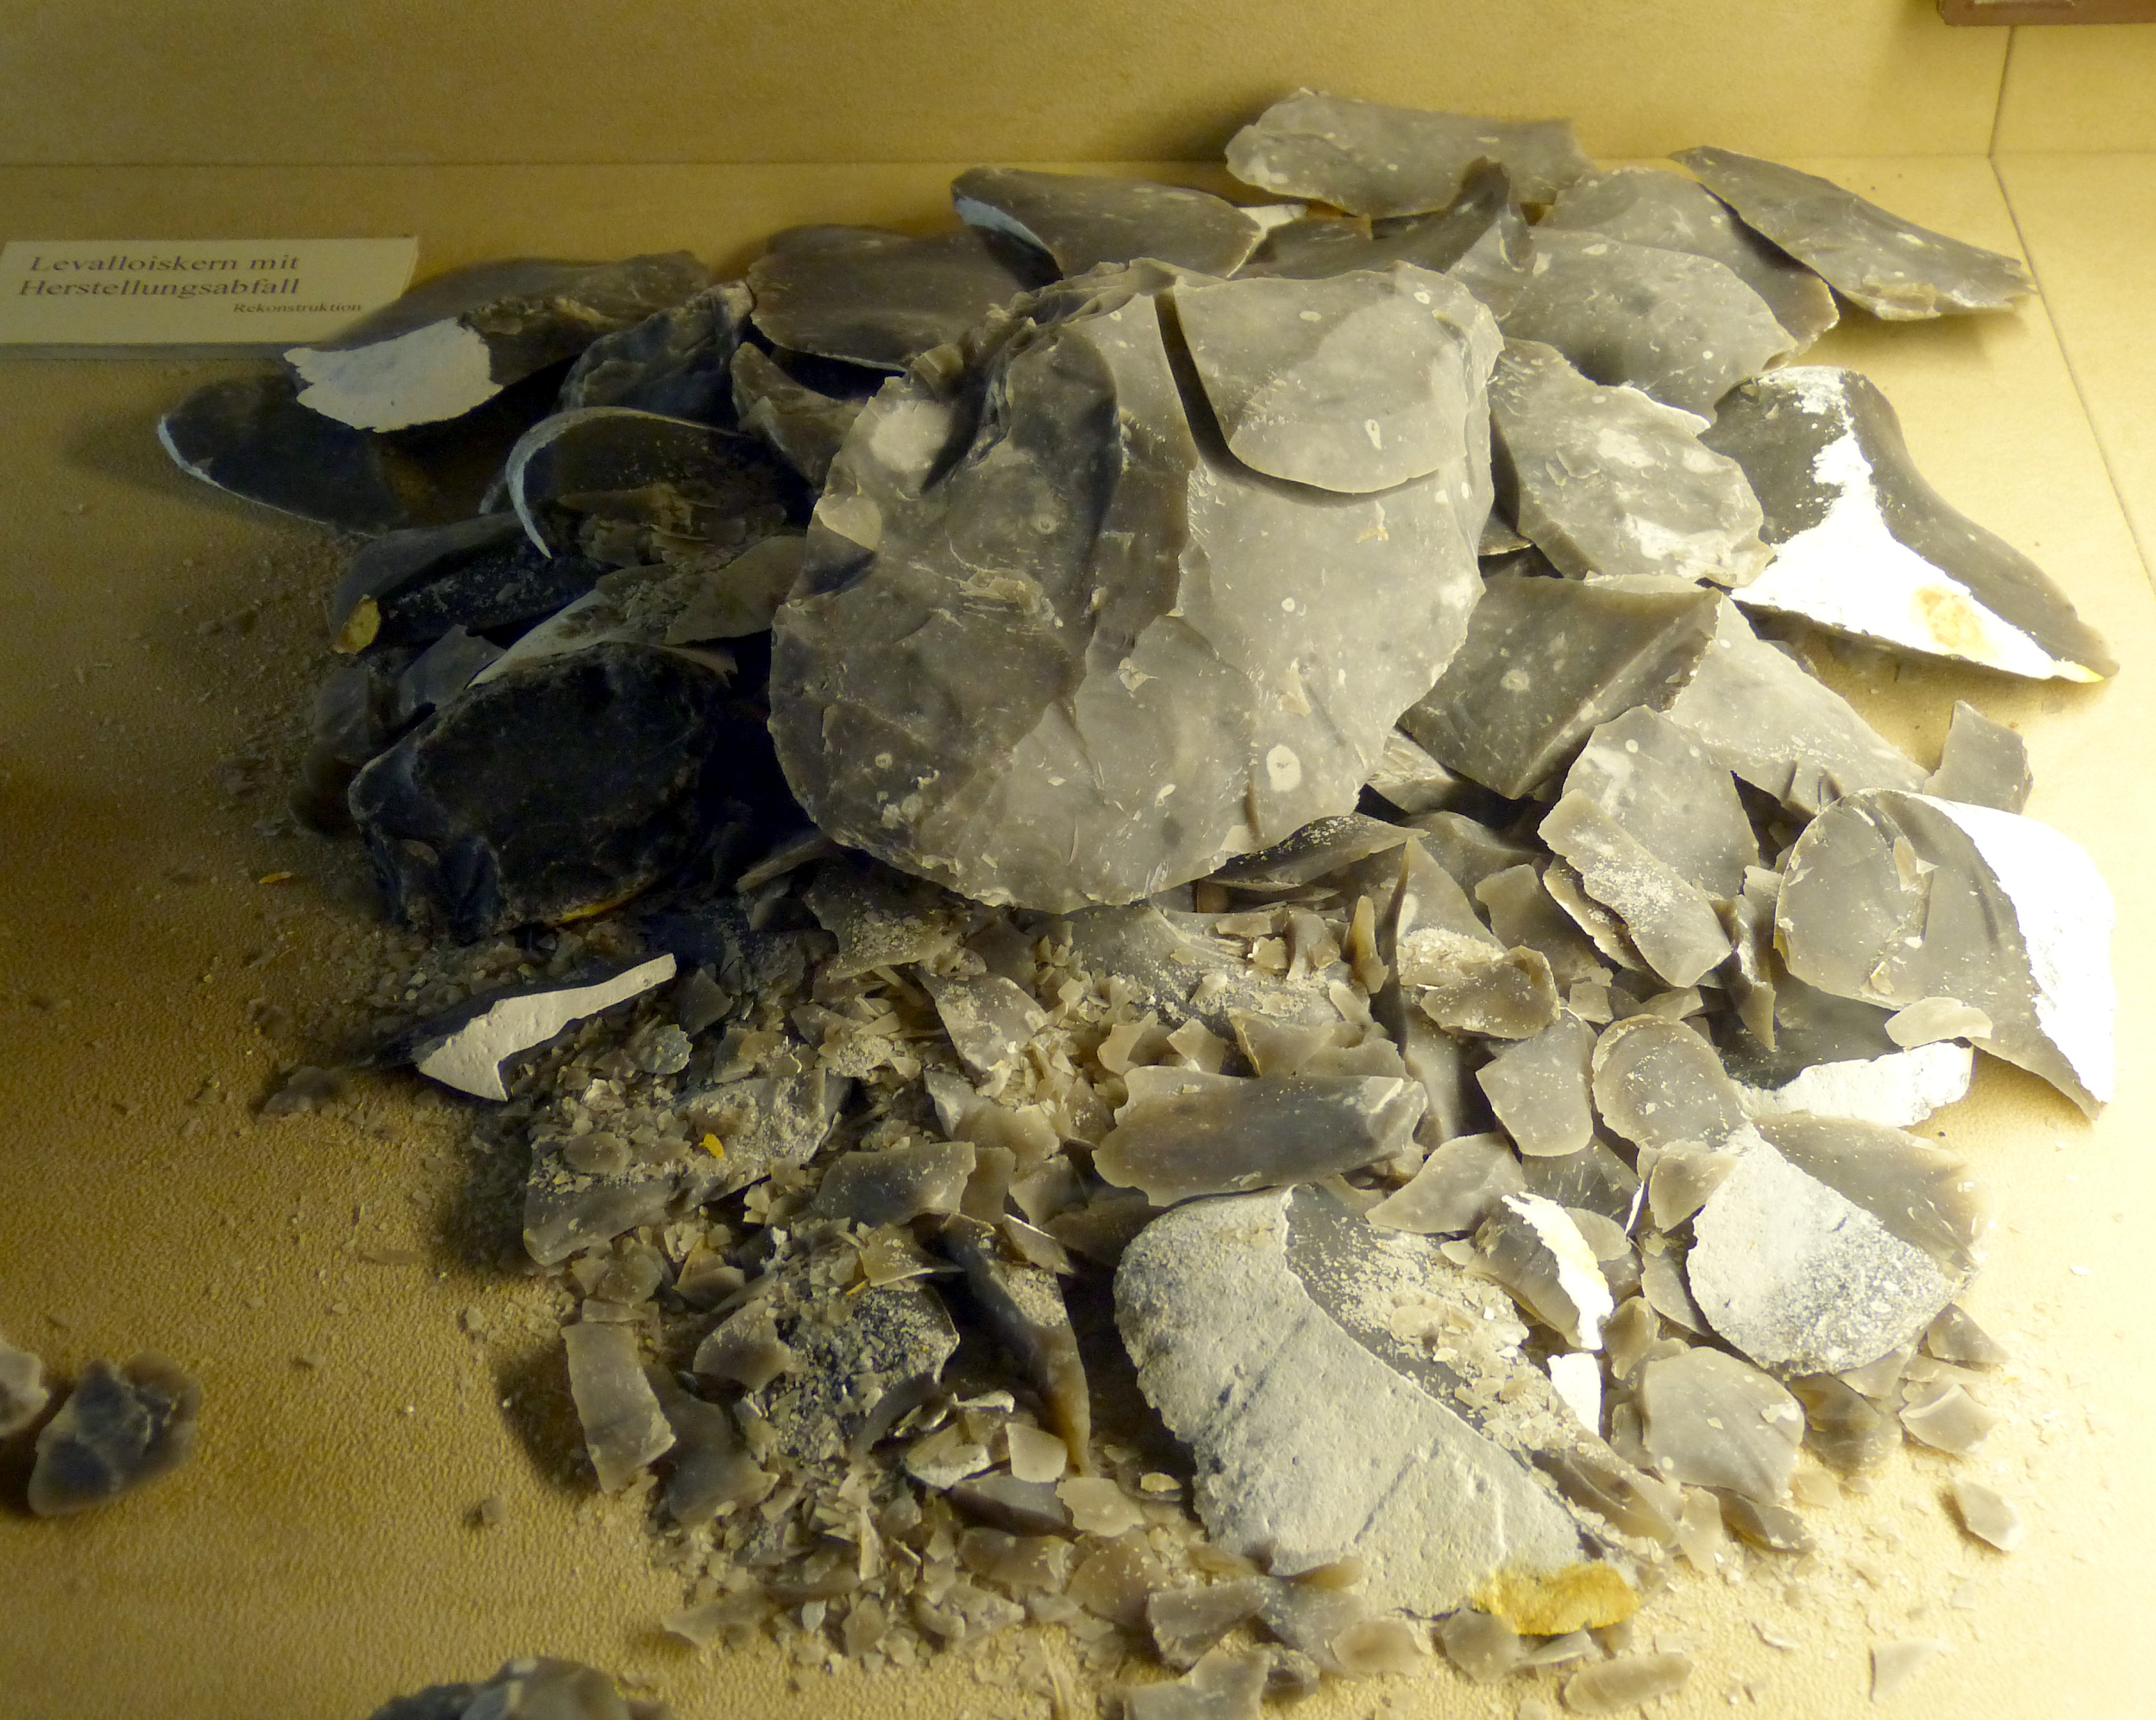 Levallois core and flakes that are gray in color and various shapes and sizes.